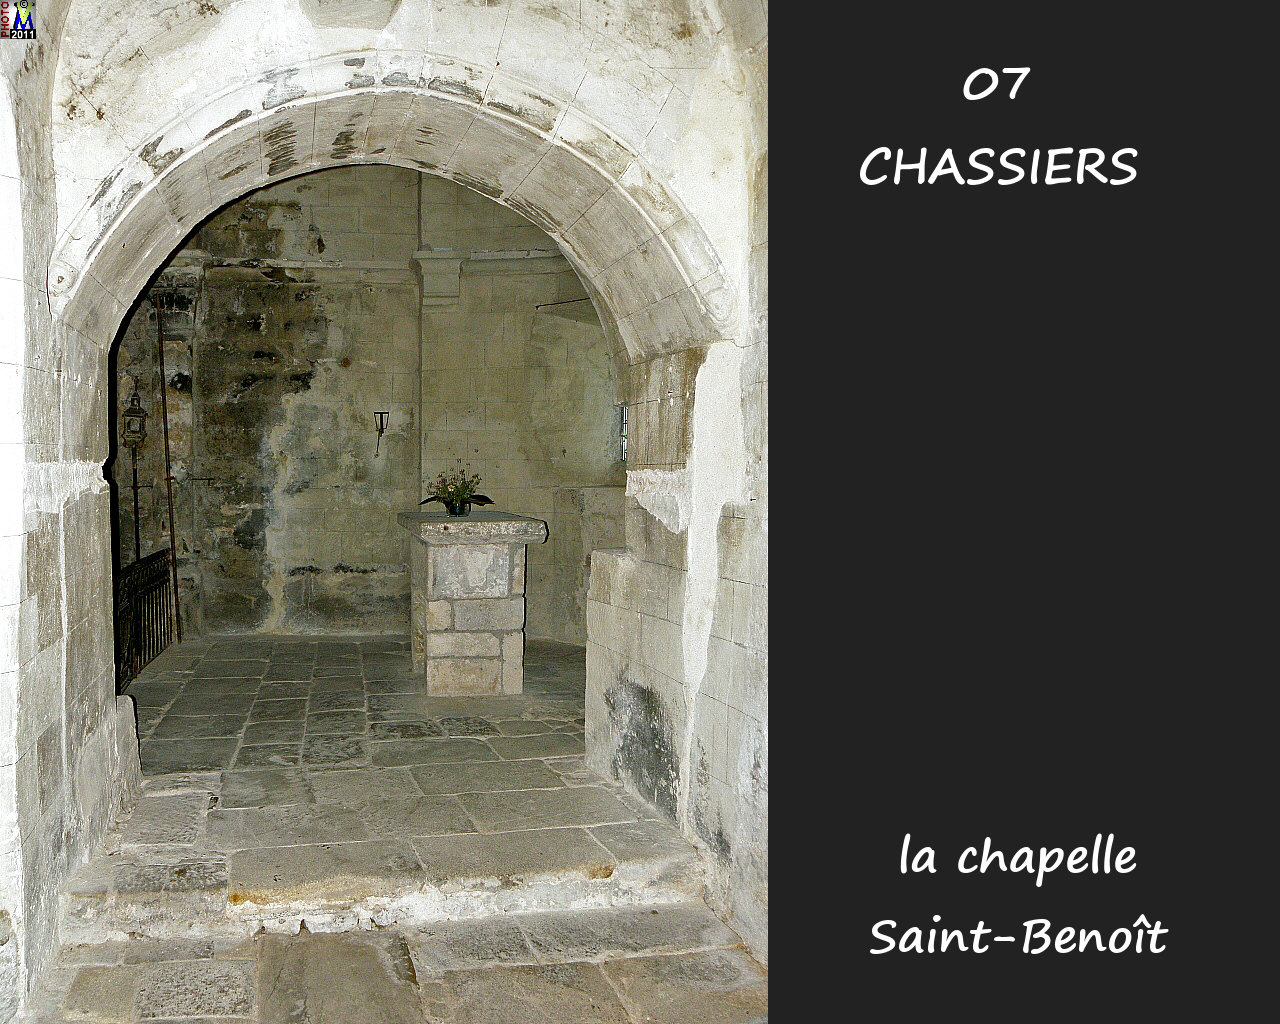 07CHASSIERS_chapelle_204.jpg